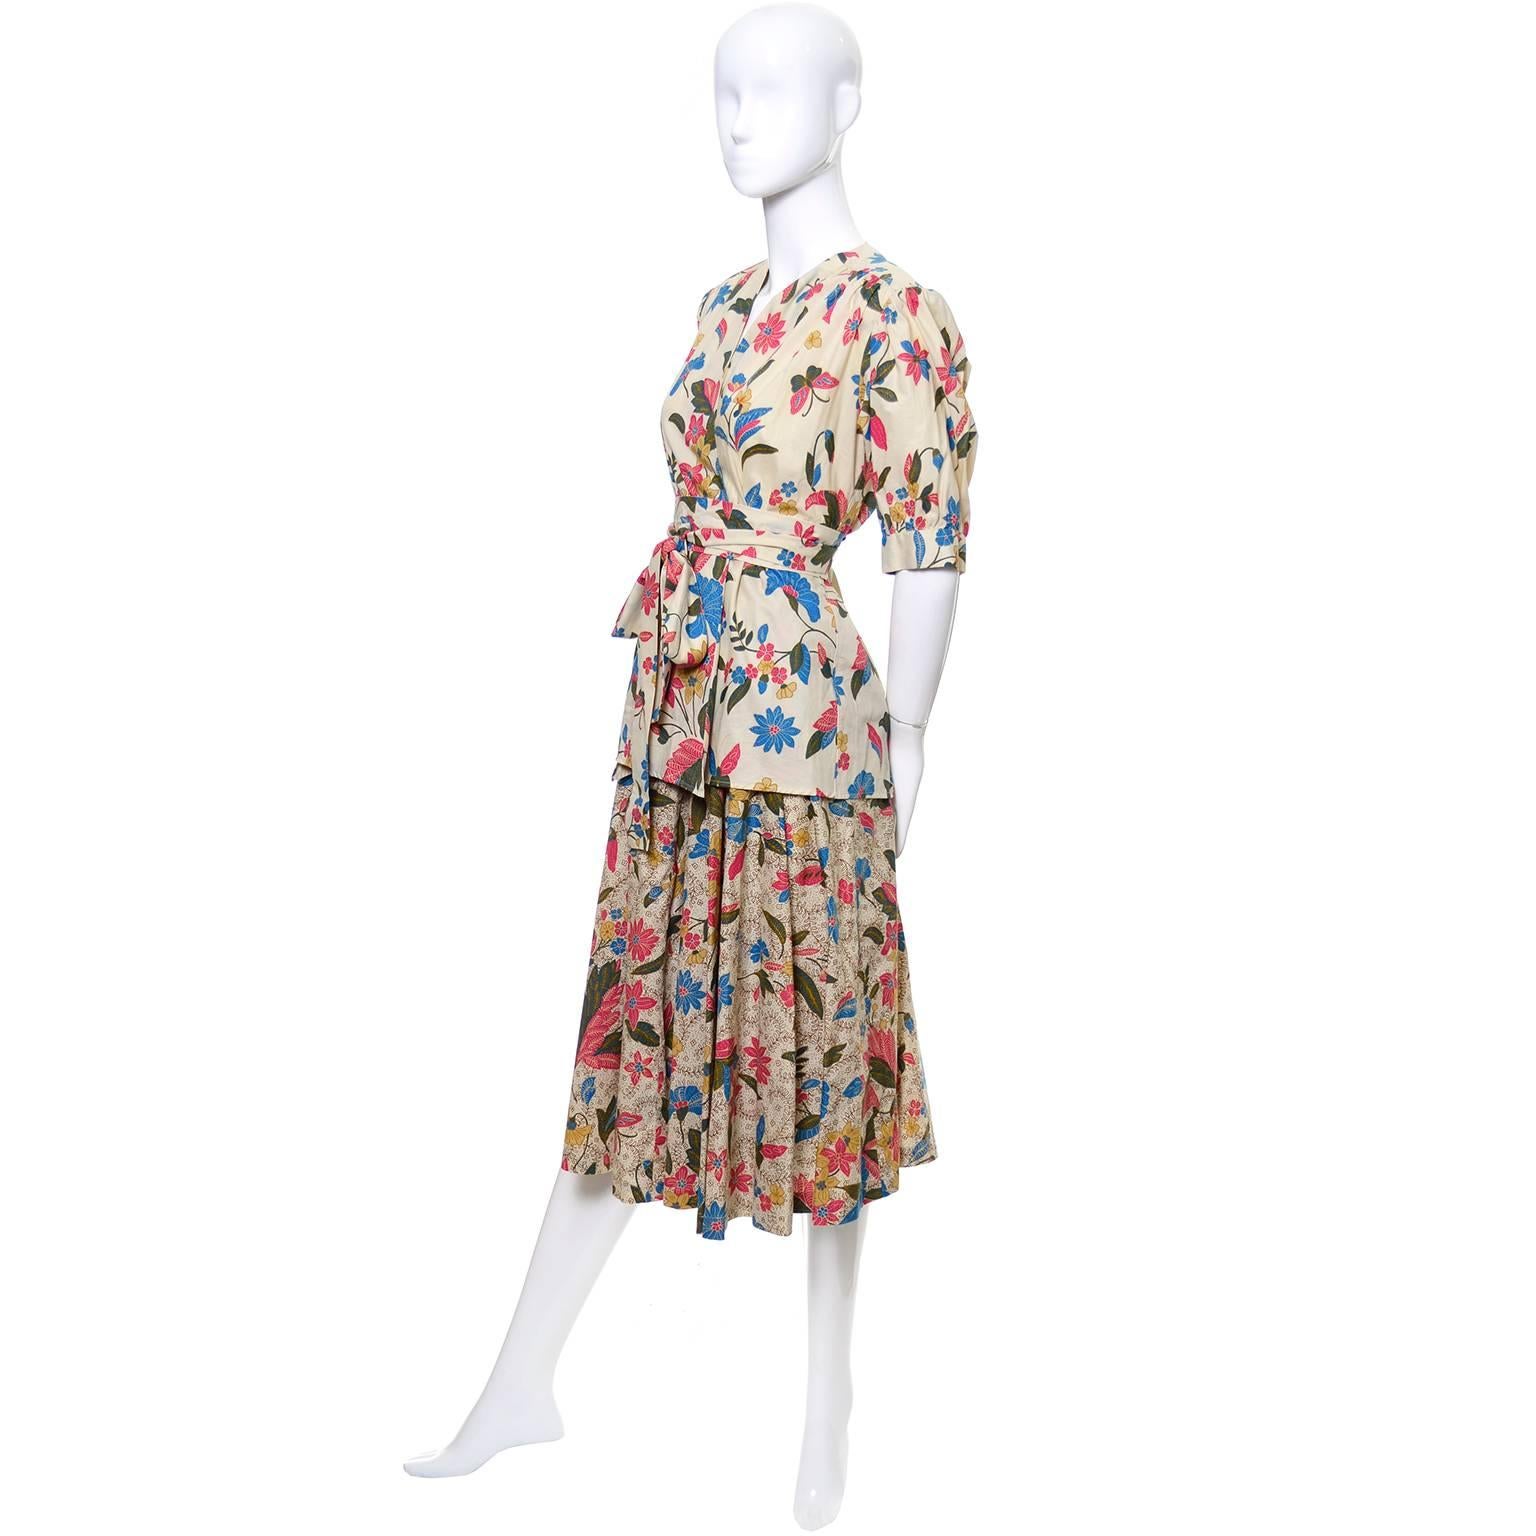 This vintage 2 piece peasant day dress outfit from Yves Saint Laurent is from one of our more memorable estates of vintage clothing and accessories. This is an incredible outfit with a full skirt and a button front blouse or jacket that can be worn